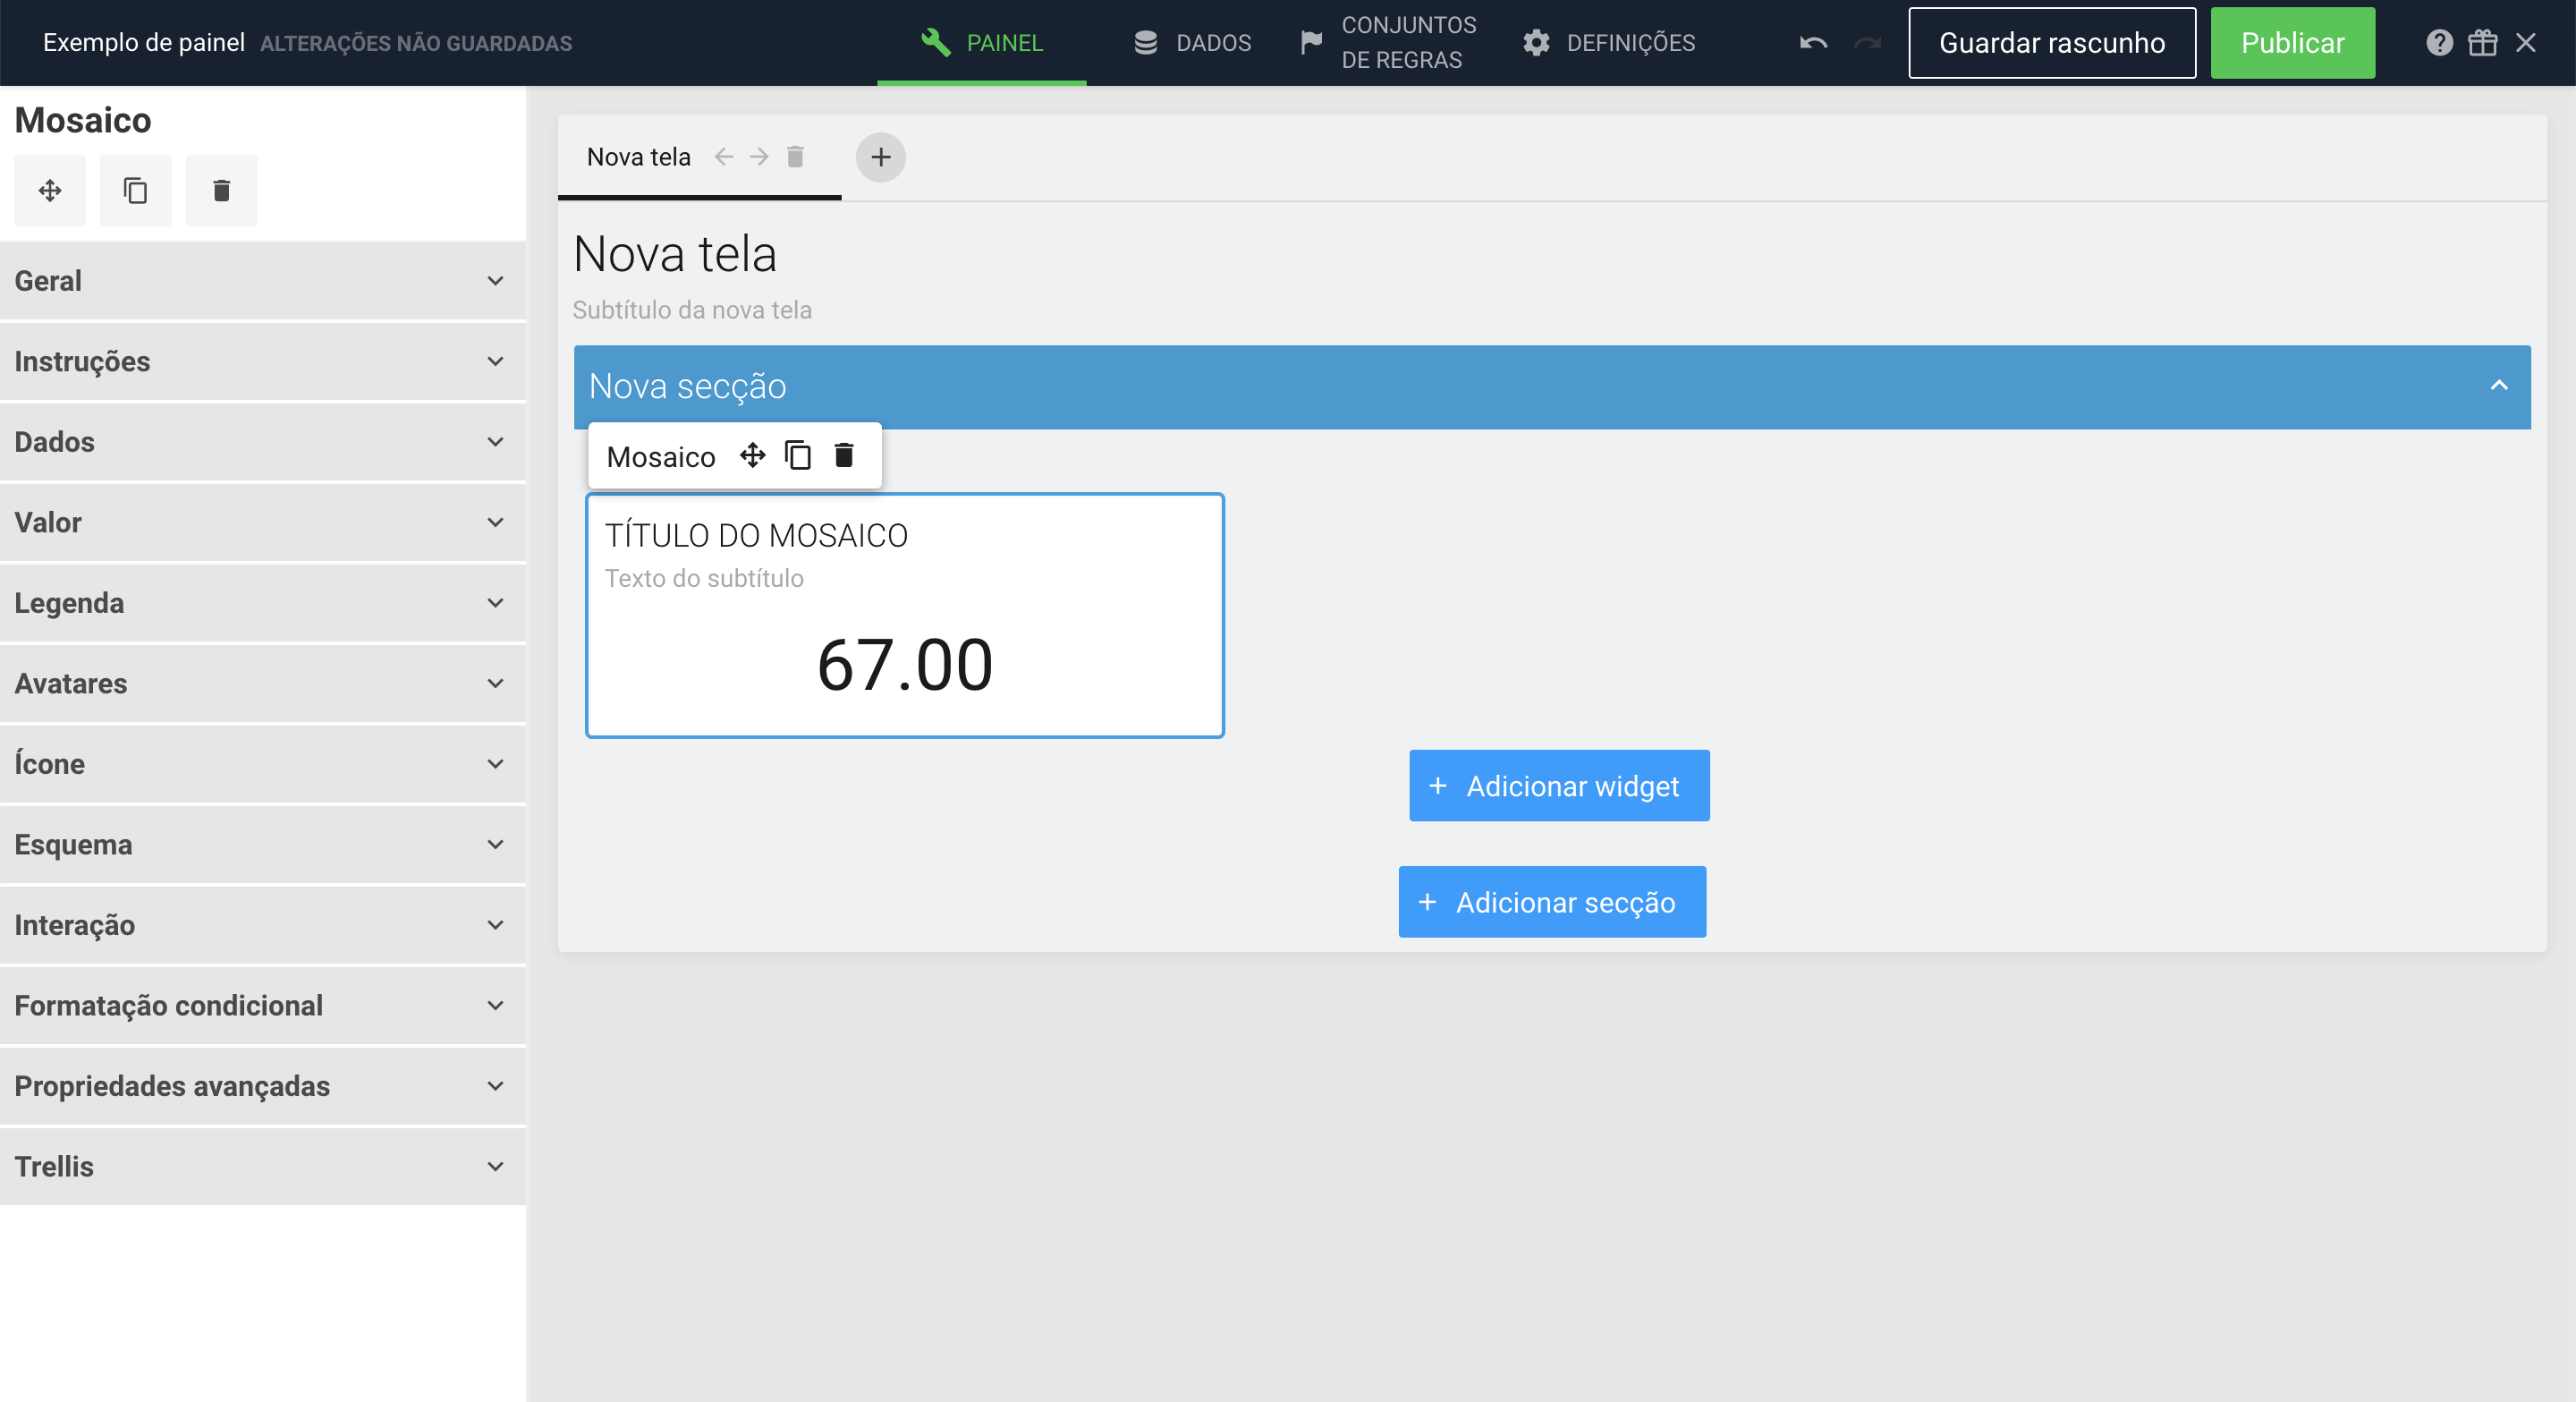 An example screenshot showing the Dashboard builder with a tile in Portuguese.